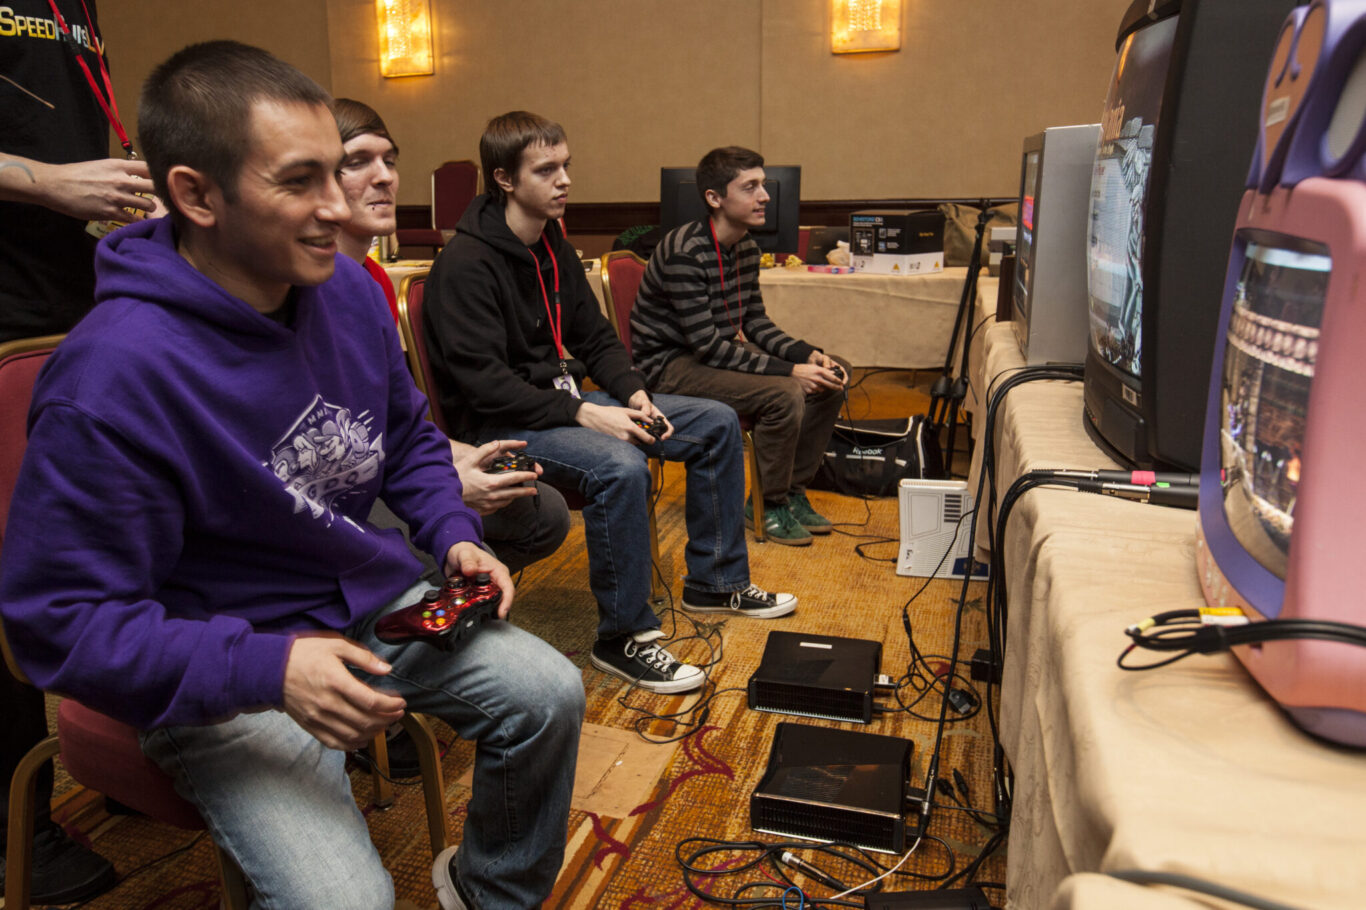 Awesome Games Done Quick video game marathon for charity this weekend